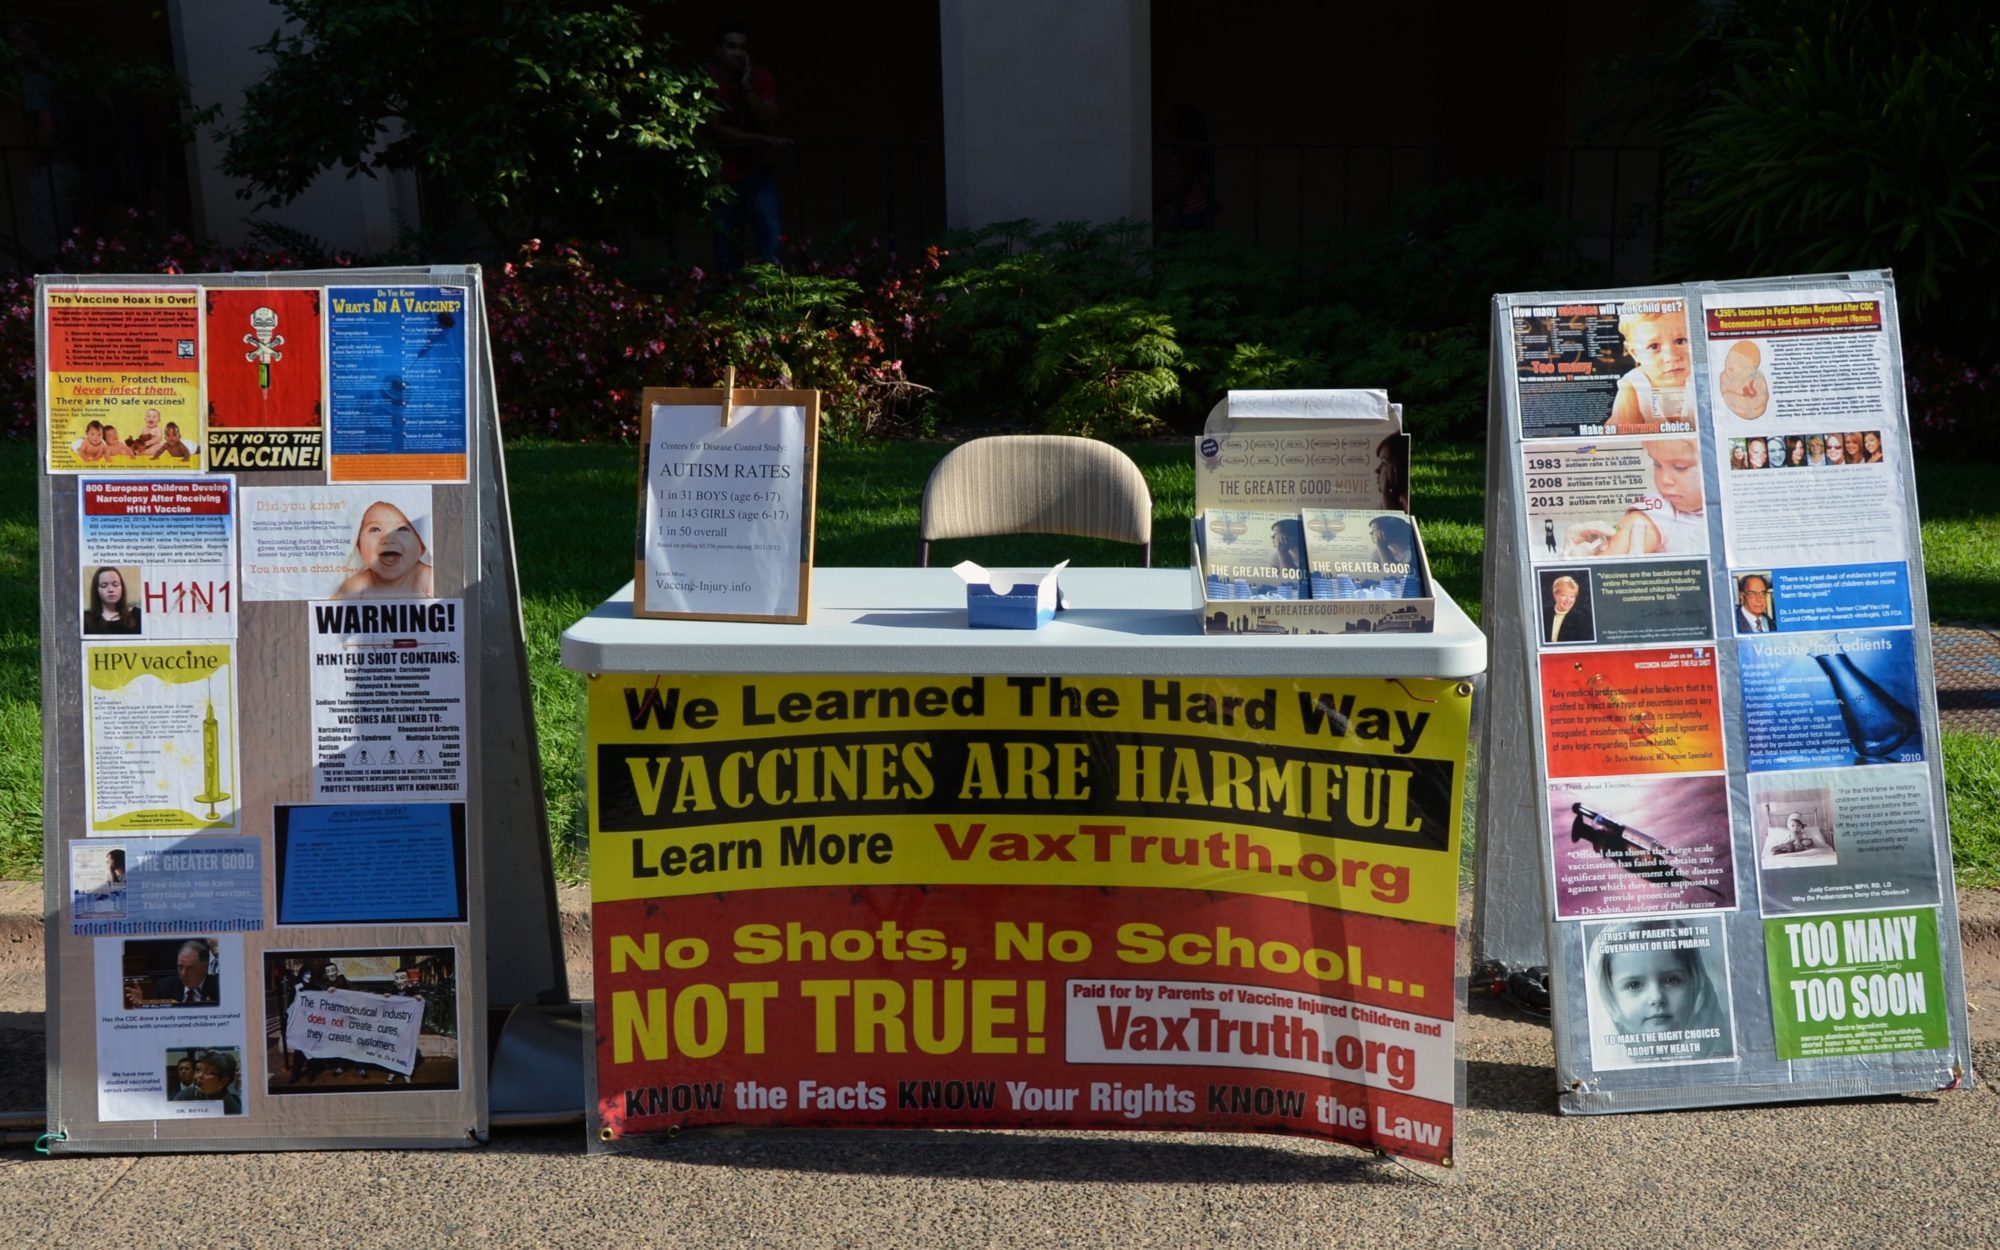 Anti-vaccine booth on street with leaflets and information